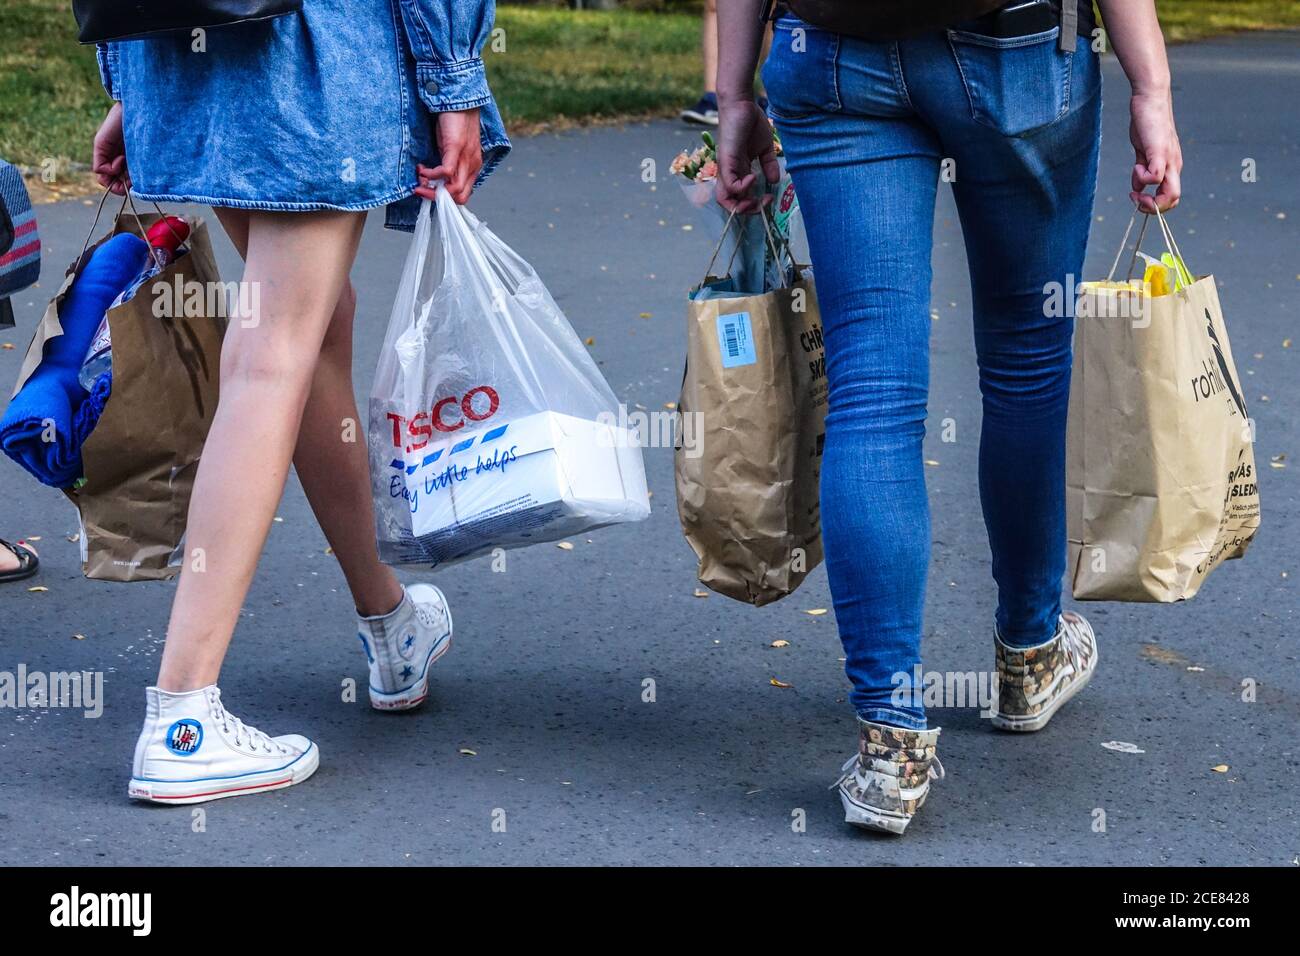 Two young women carrying shopping bags from the supermarket One plastic bag and paper bags for recycling Together walking away Stock Photo